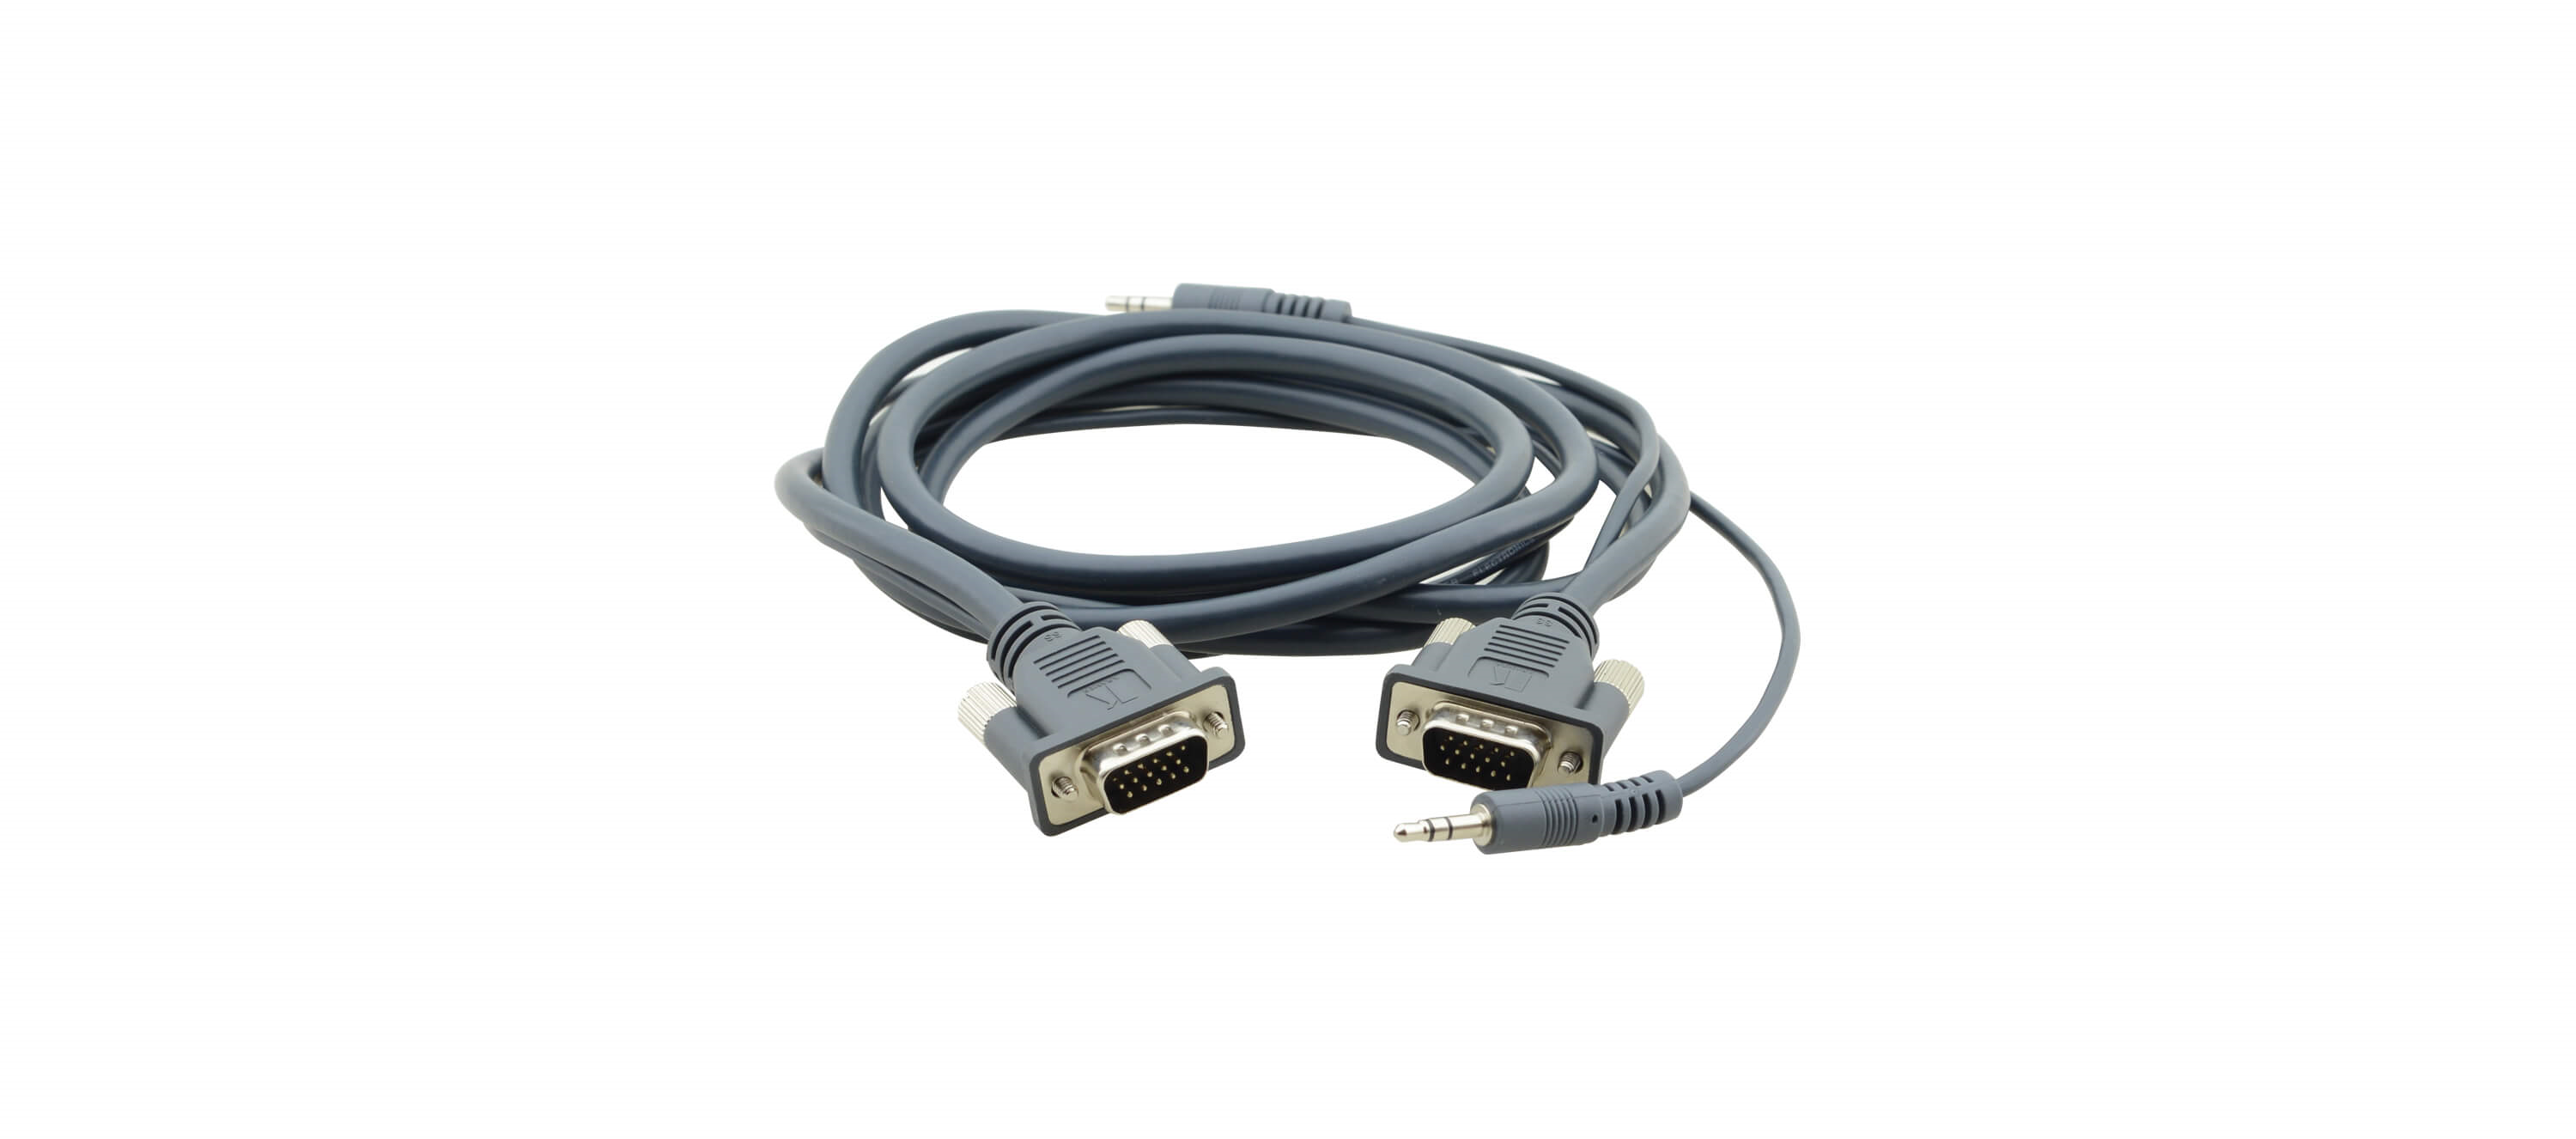 C-MGMA/MGMA-35 15–pin HD & 3.5mm Stereo Audio Micro Cable - 35'